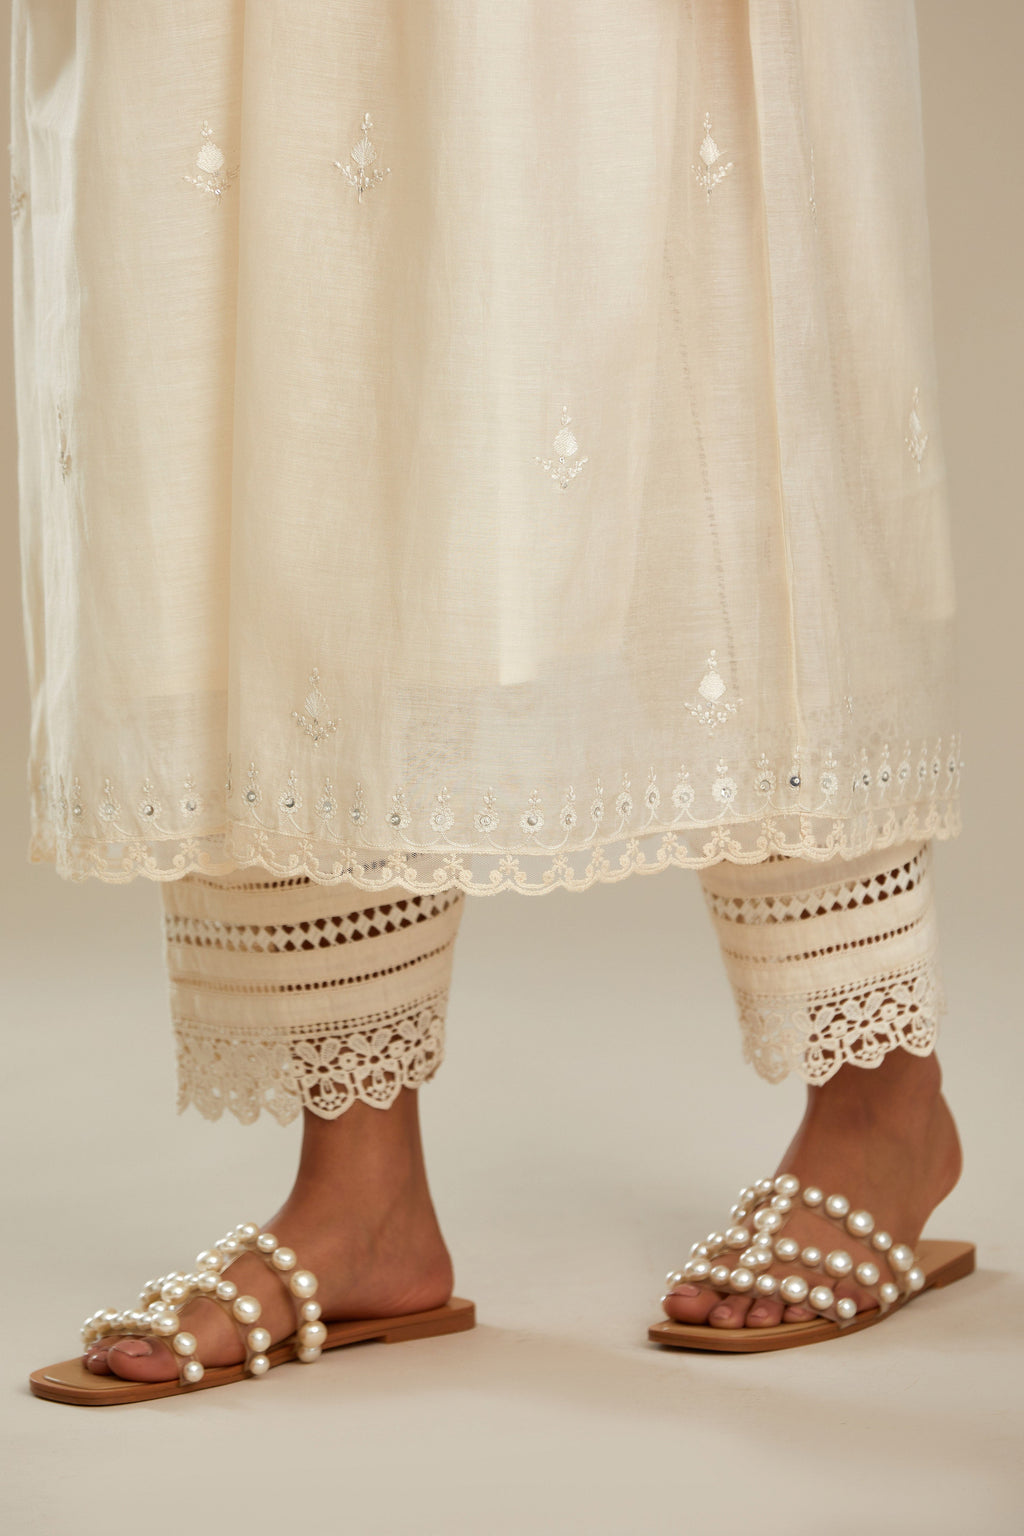 Off white cotton chanderi kurta set with tonal silk thread embroidery highlighted with sequins and beads.